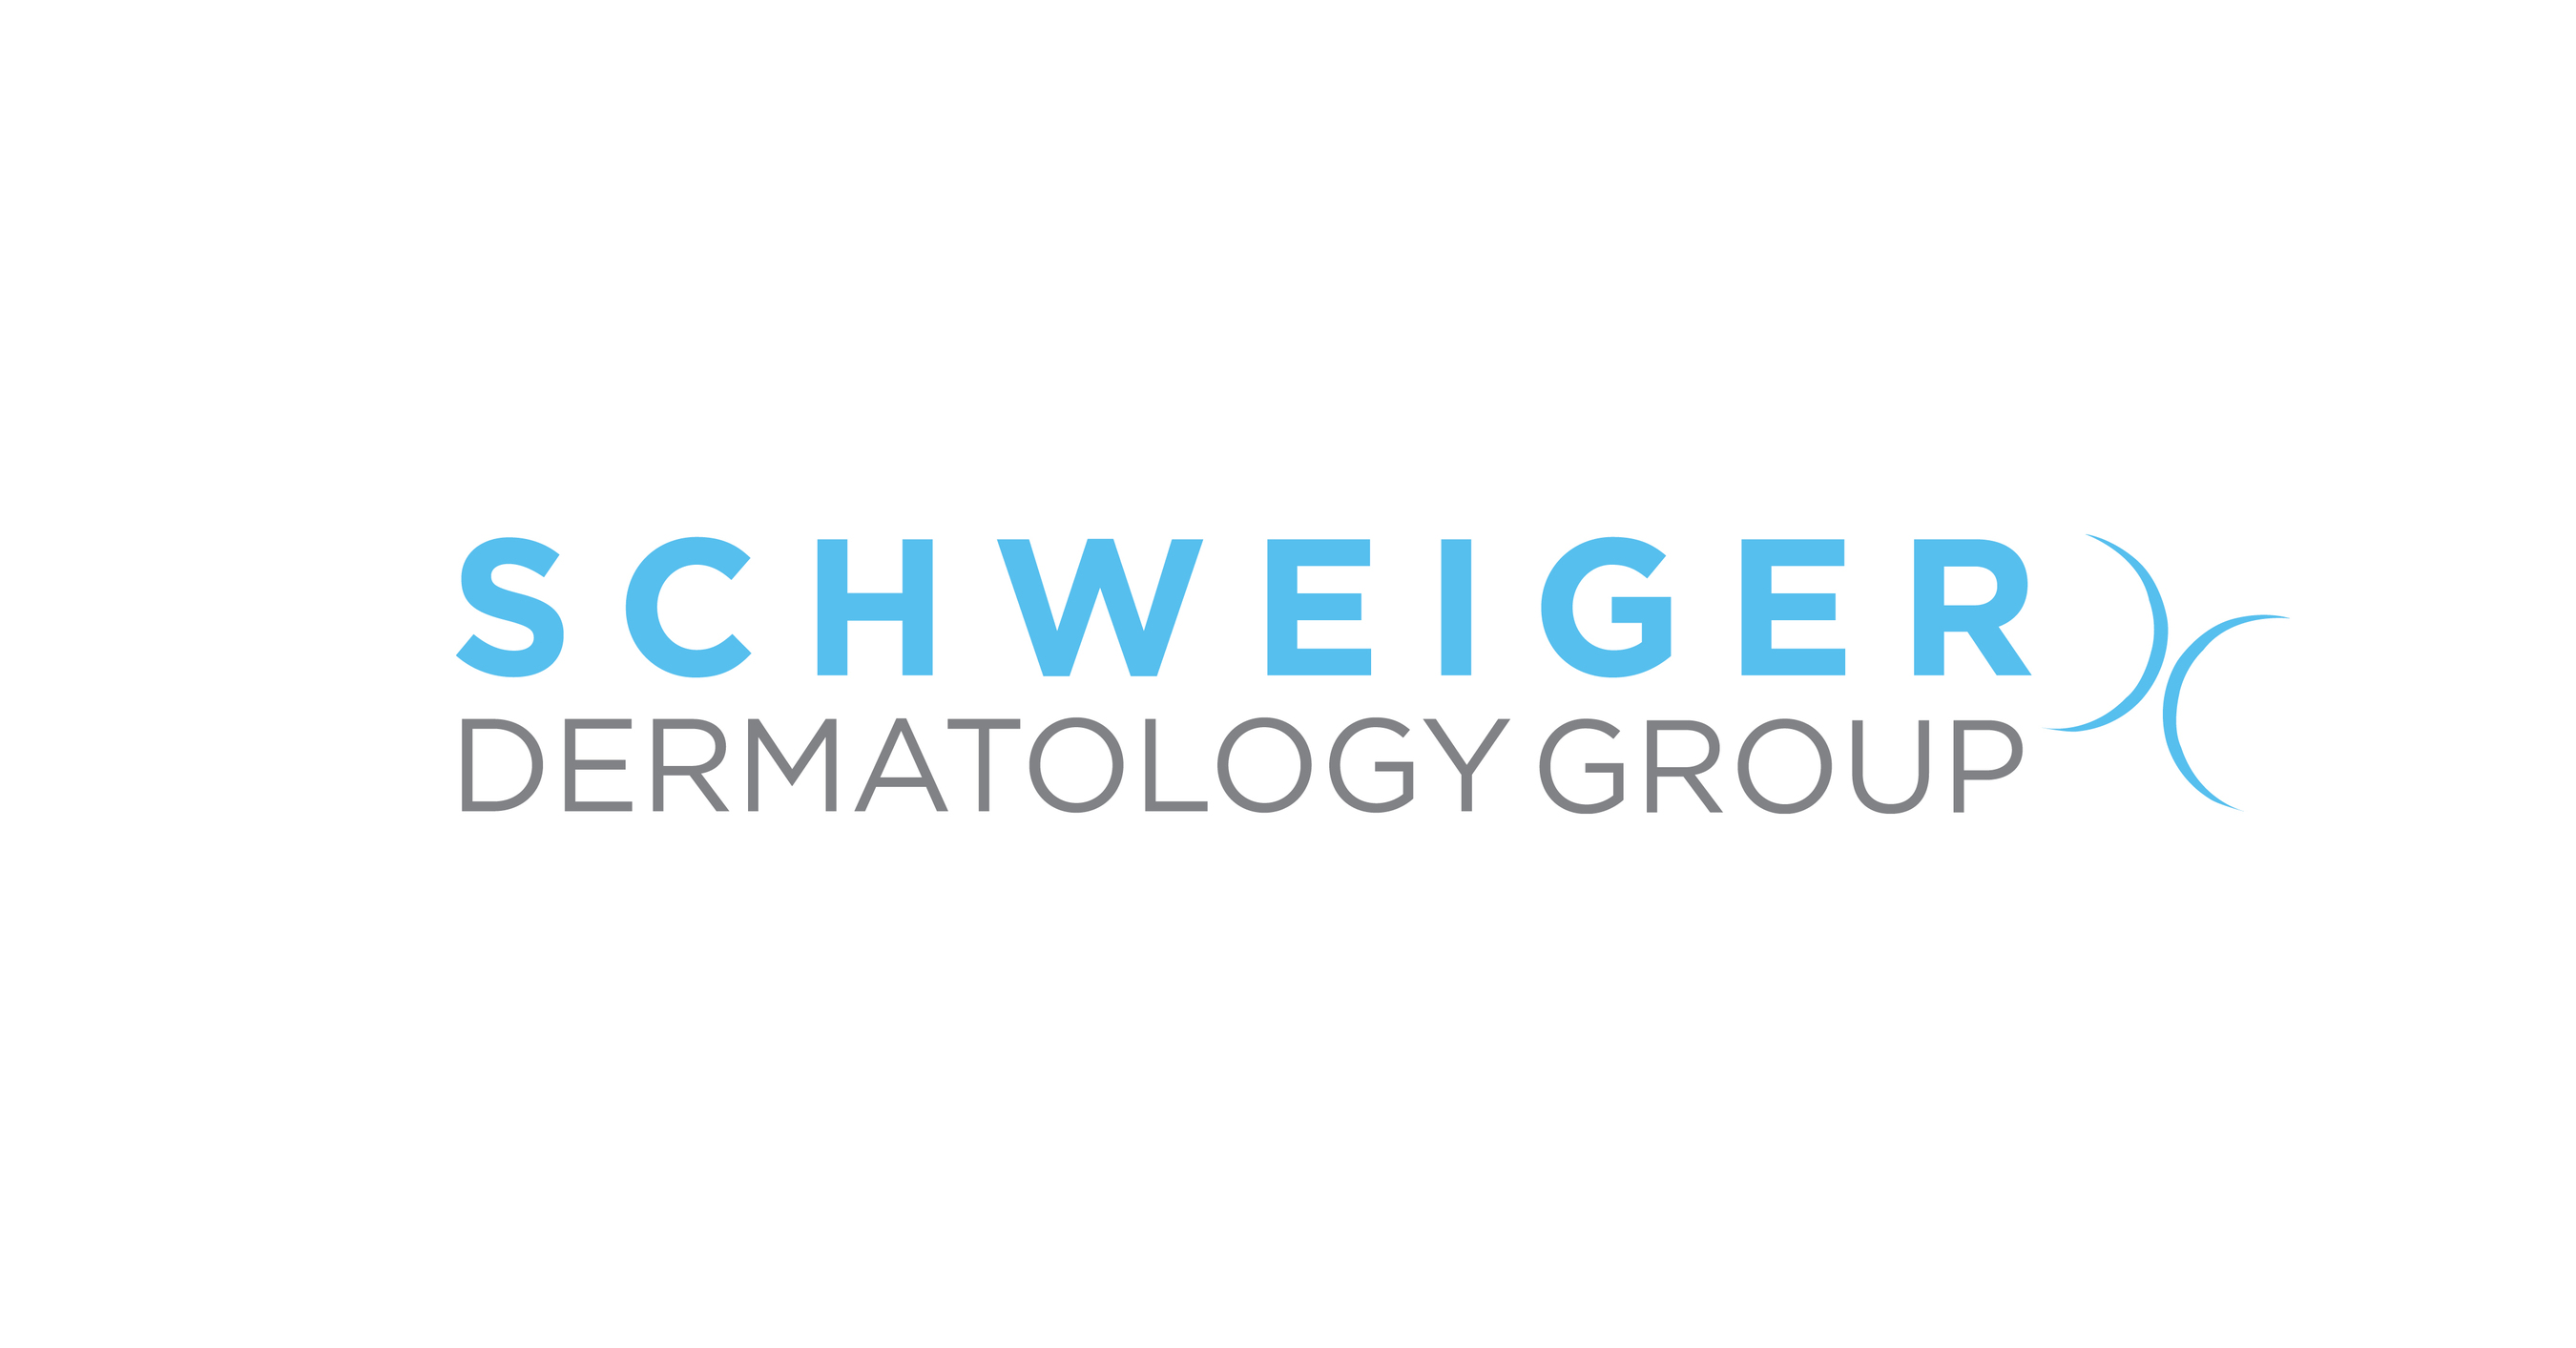 Schweiger Dermatology Group listed on Crain s New York Business Fast 50